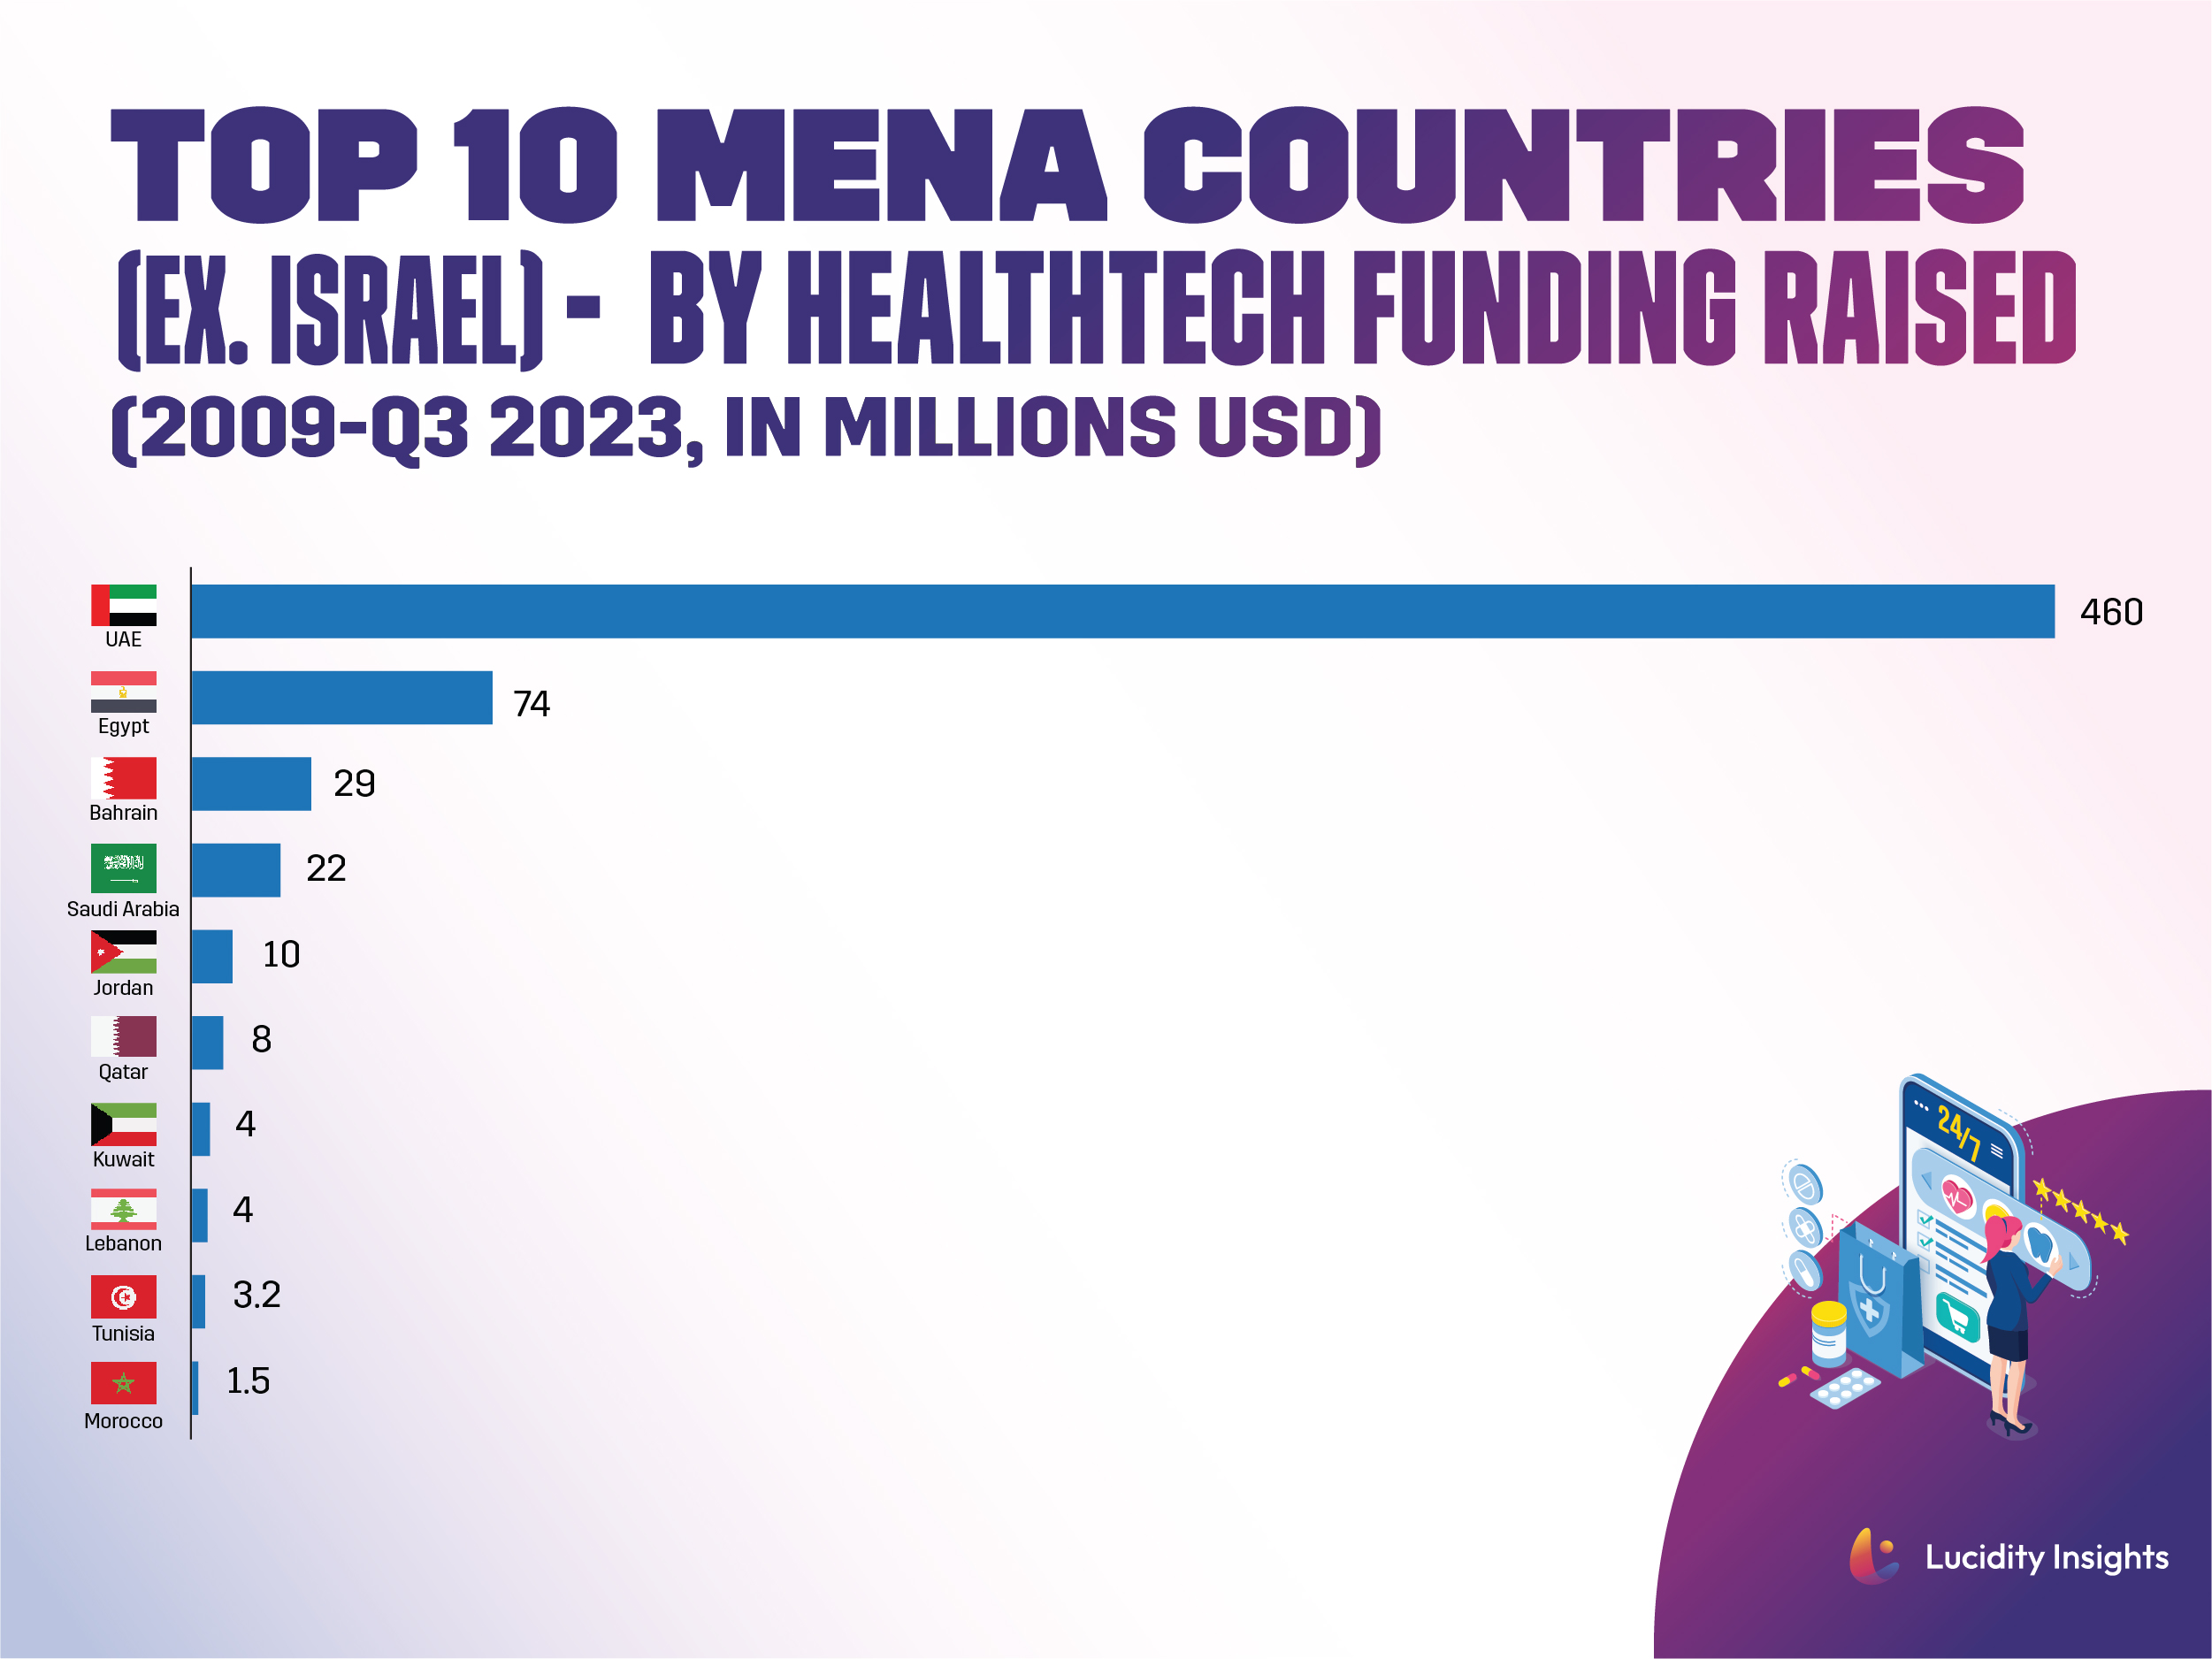 Top 10 MENA Countries (Ex. Israel) by Healthtech Funding Raised (2009-Q3 2023, in Million USD)